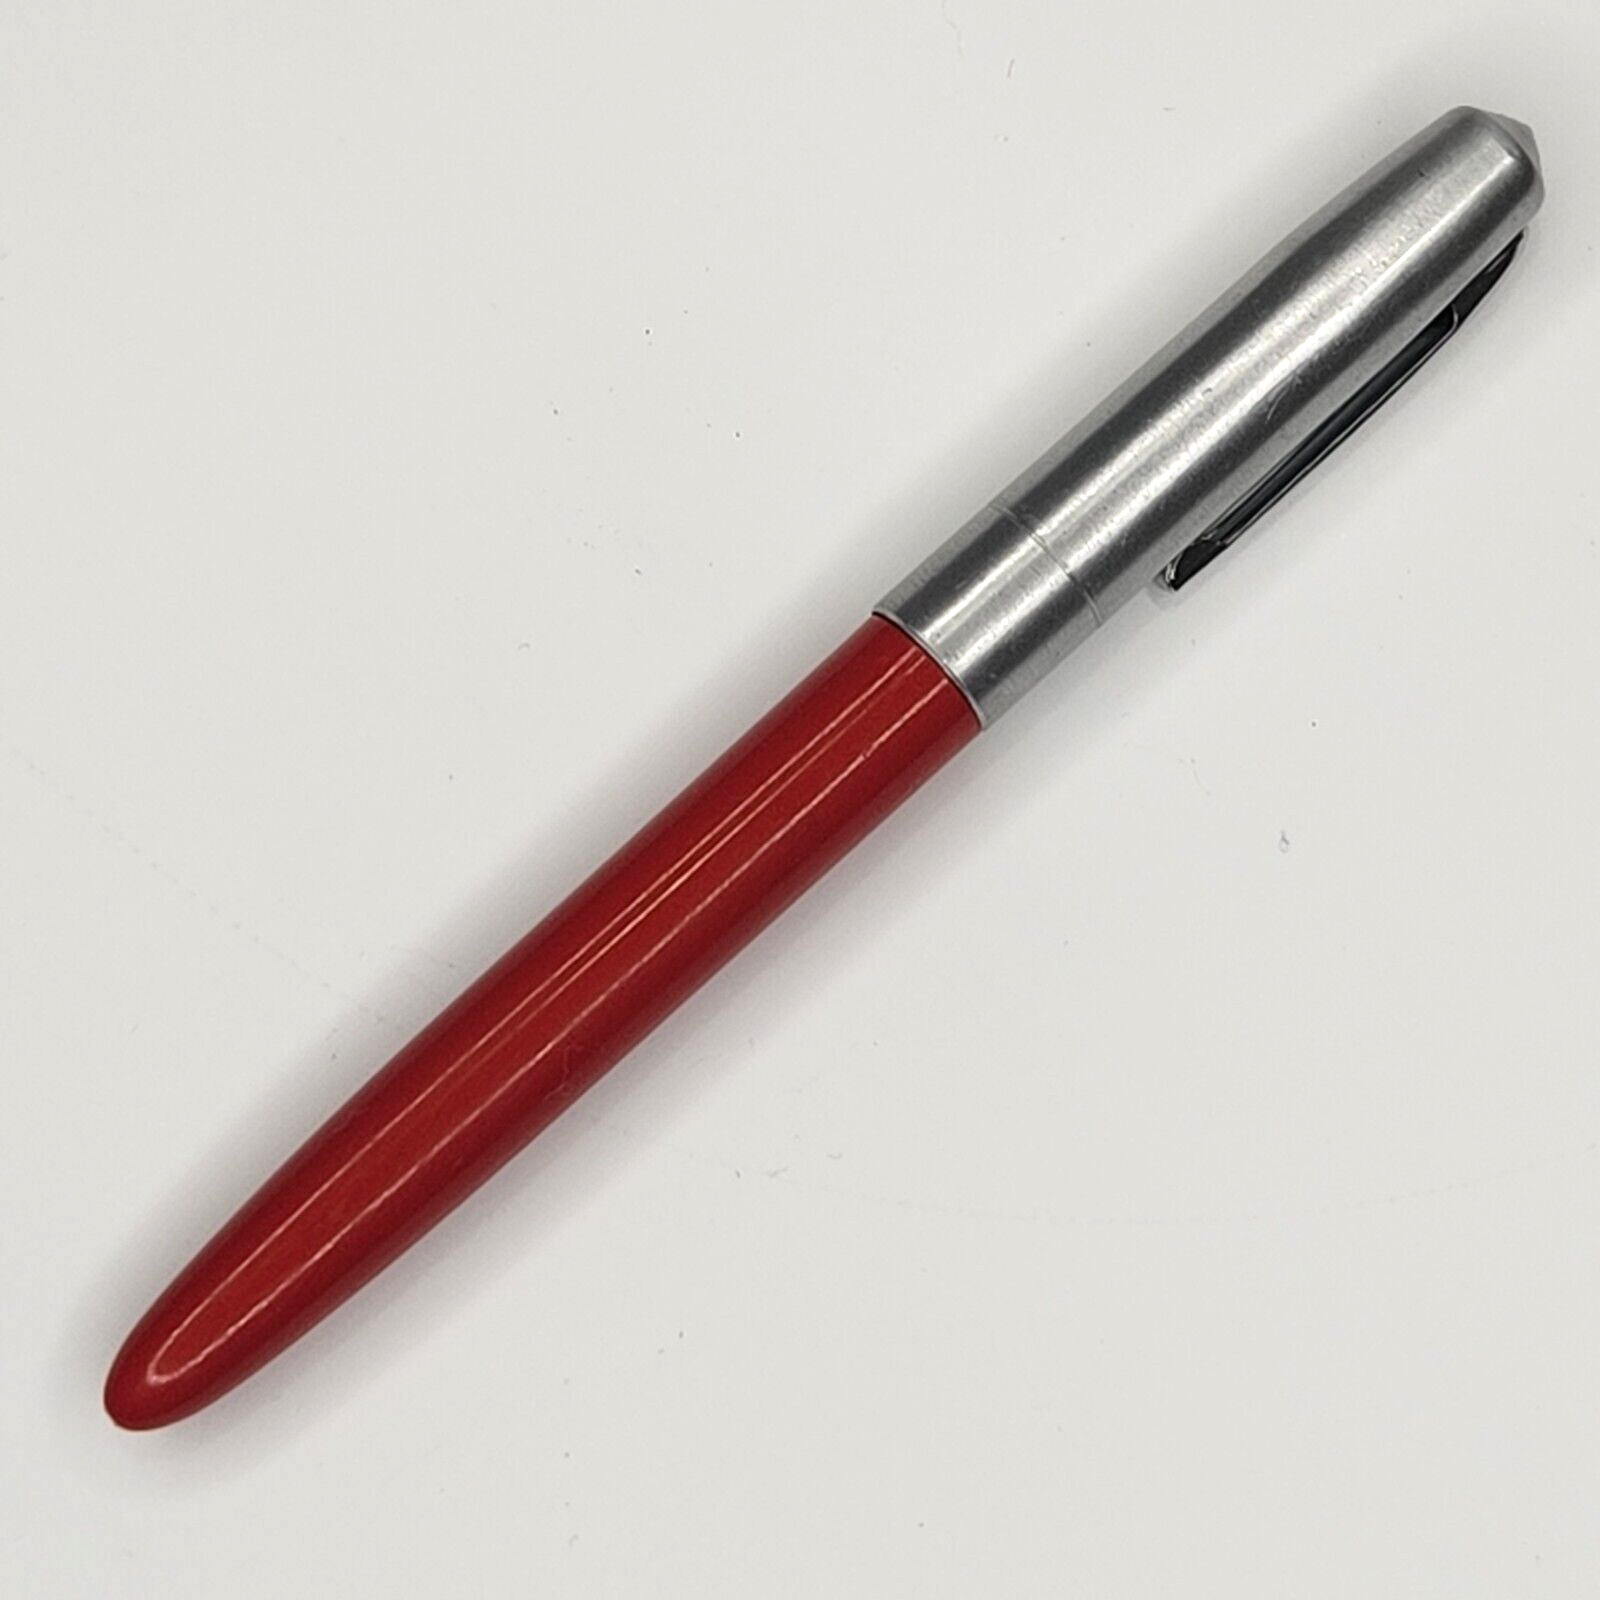 Vintage WEAREVER Fountain Pen Red Silver Cap Stainless Steel Tip Made in USA